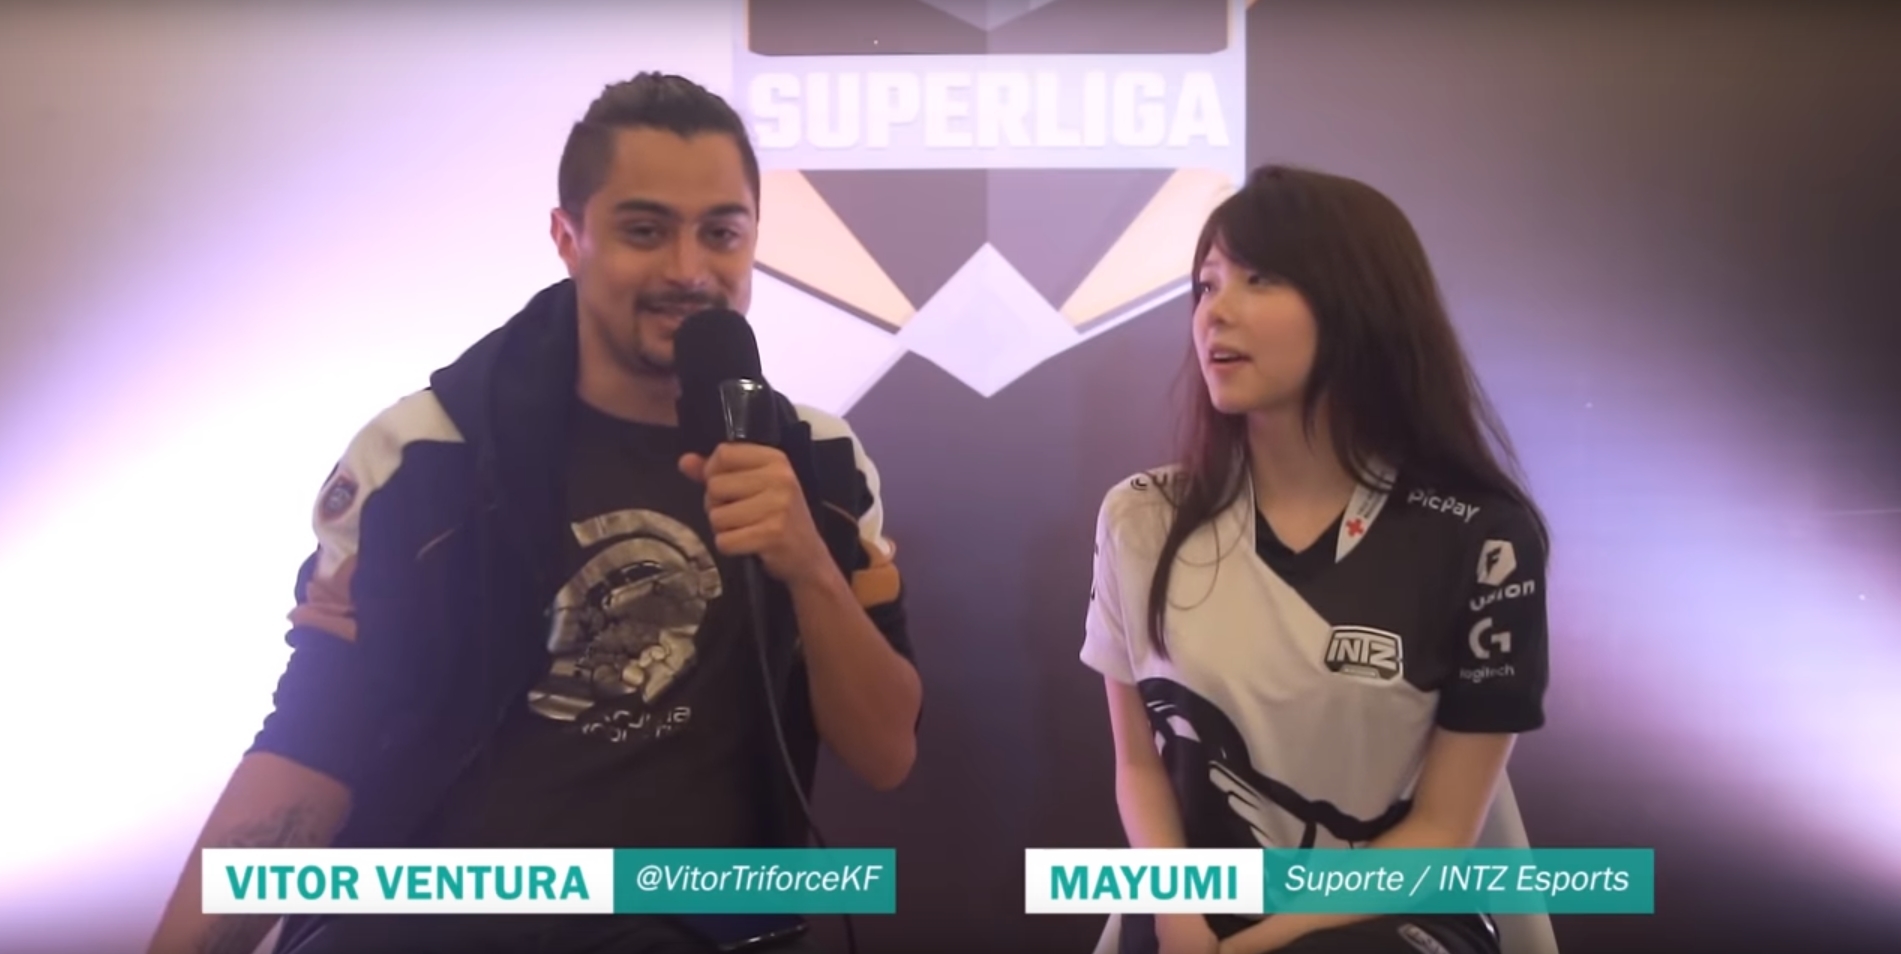 INTZ e-Sports Adds Julia “Mayumi” Nakamura To Roster As Their First Female League of Legends Player